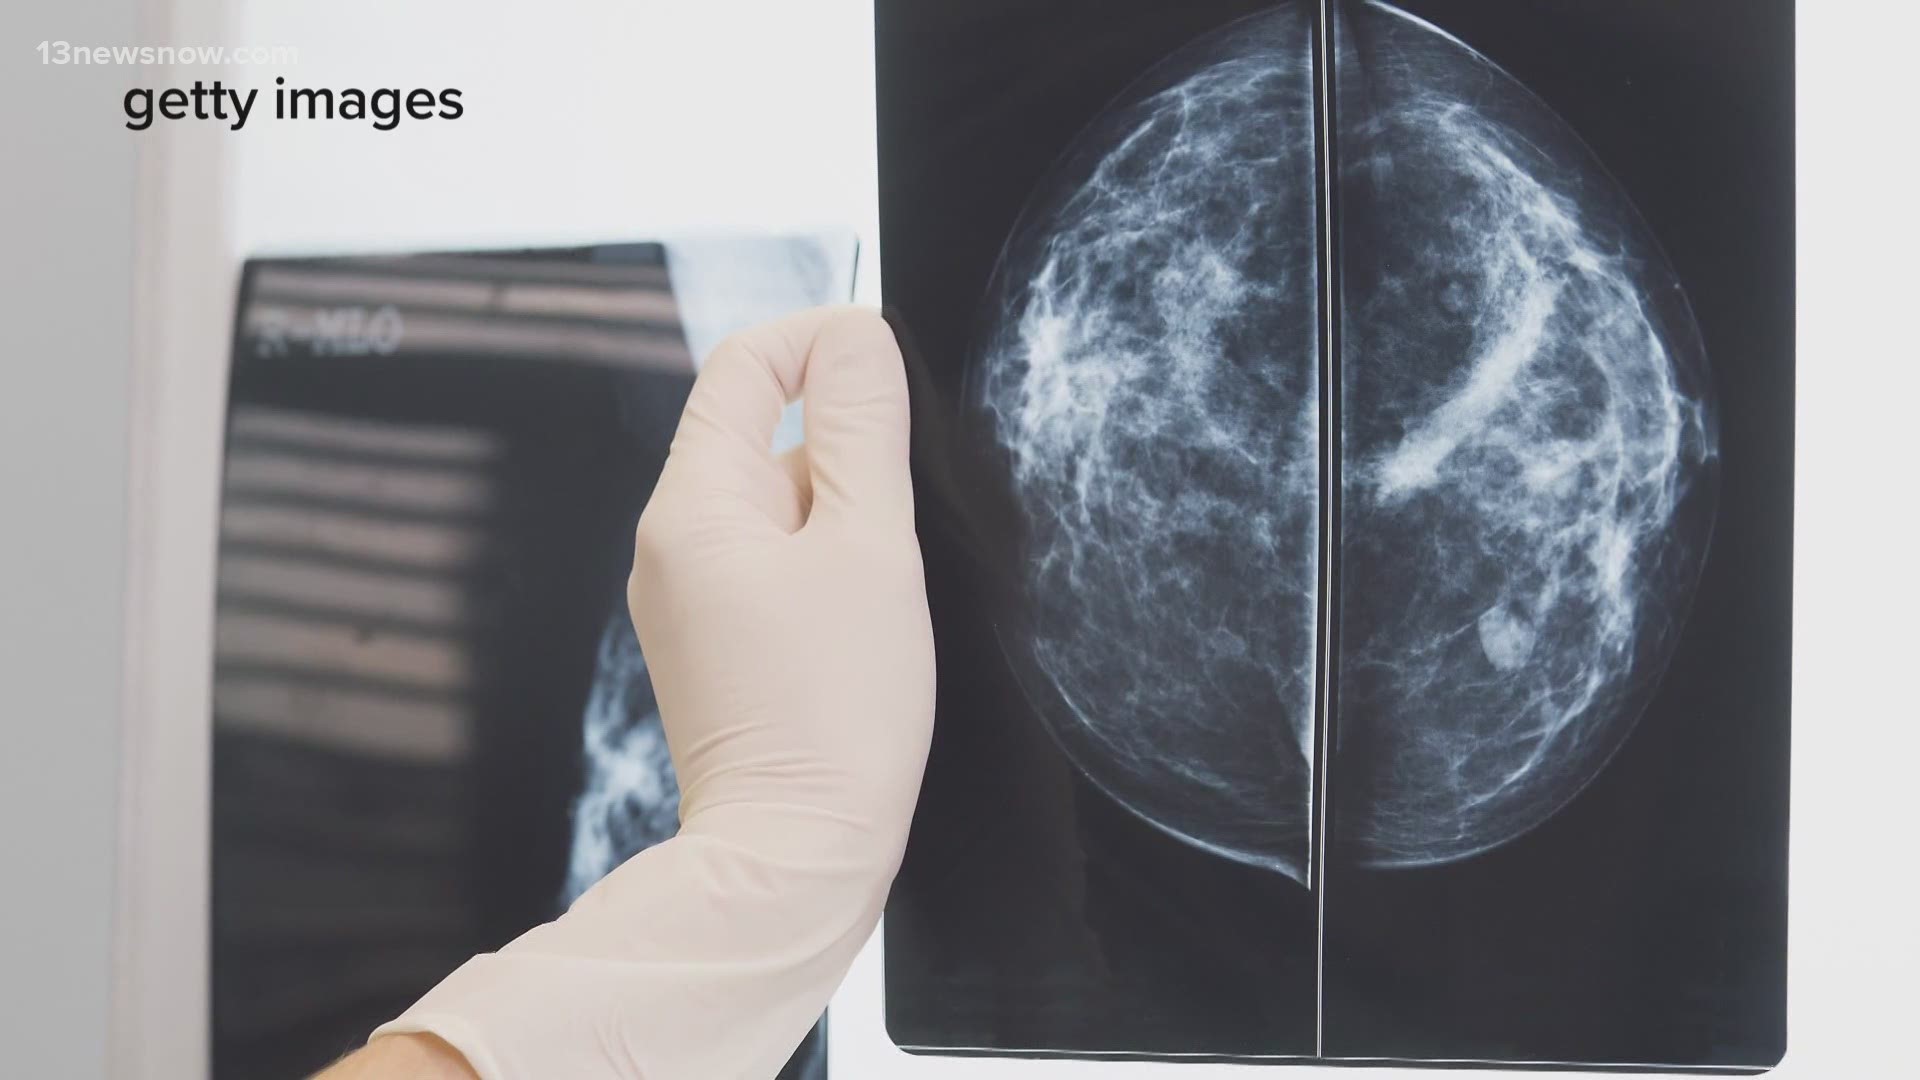 Researchers at the University of Virginia have identified a gene that spreads “triple-negative” breast cancer to other parts of the body.